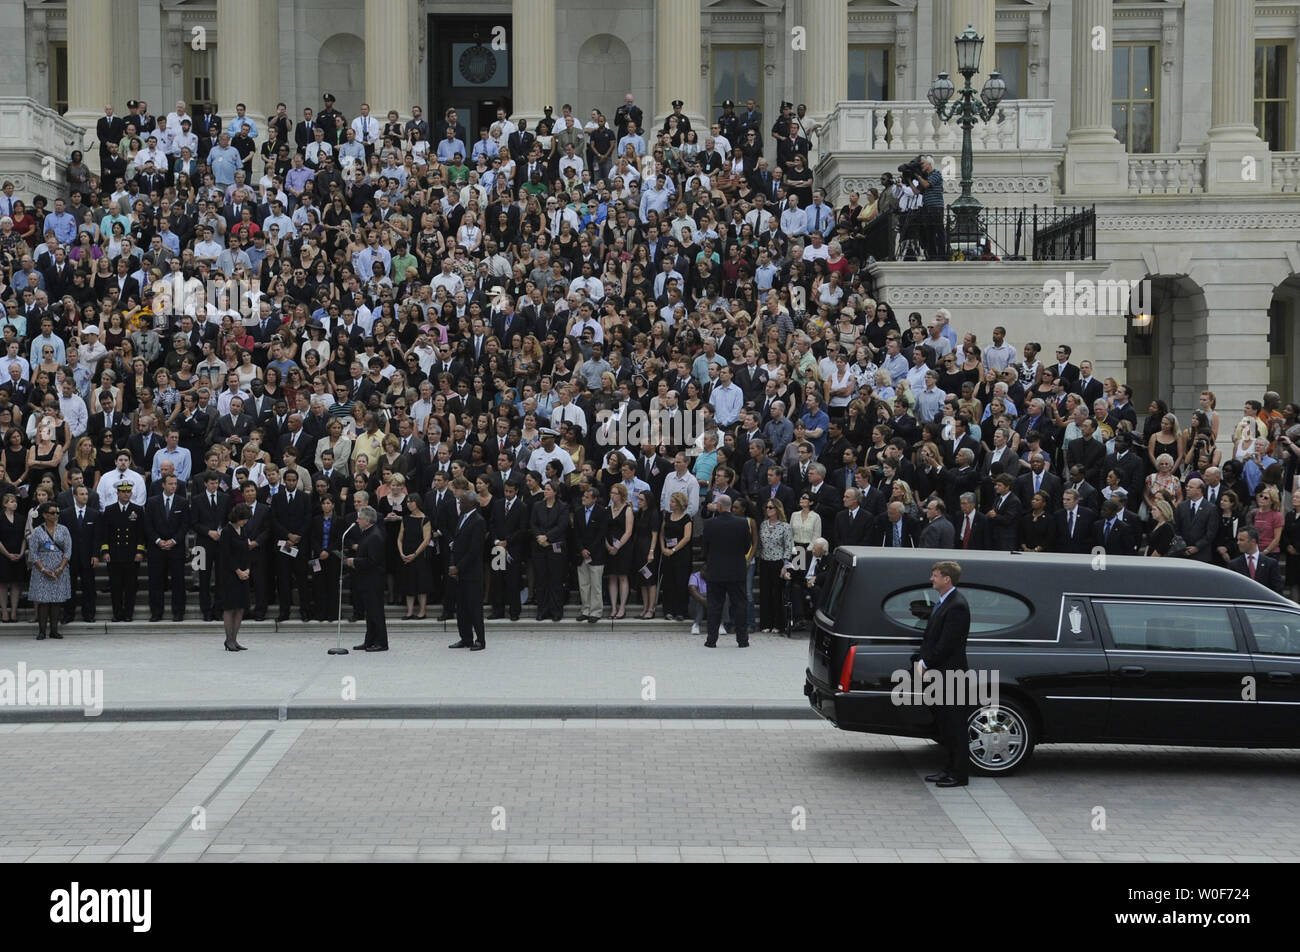 Rep. Patrick Kennedy (D-RI) (R) stands by the hearse carrying the remains of U.S. Senator Edward Kennedy as Reverend Daniel P. Coughlin, Chaplain of the U.S. House of Representatives, says a prayer while widow Vicki Kennedy (L) and members of Congress and former and current staff members of the Senator listen, outside the U.S. Capitol building in Washington on August 29, 2009. Senator Kennedy, who passed away August 25 at the age of 77, will be buried  today at Arlington National Cemetery. UPI/Alexis C. Glenn Stock Photo